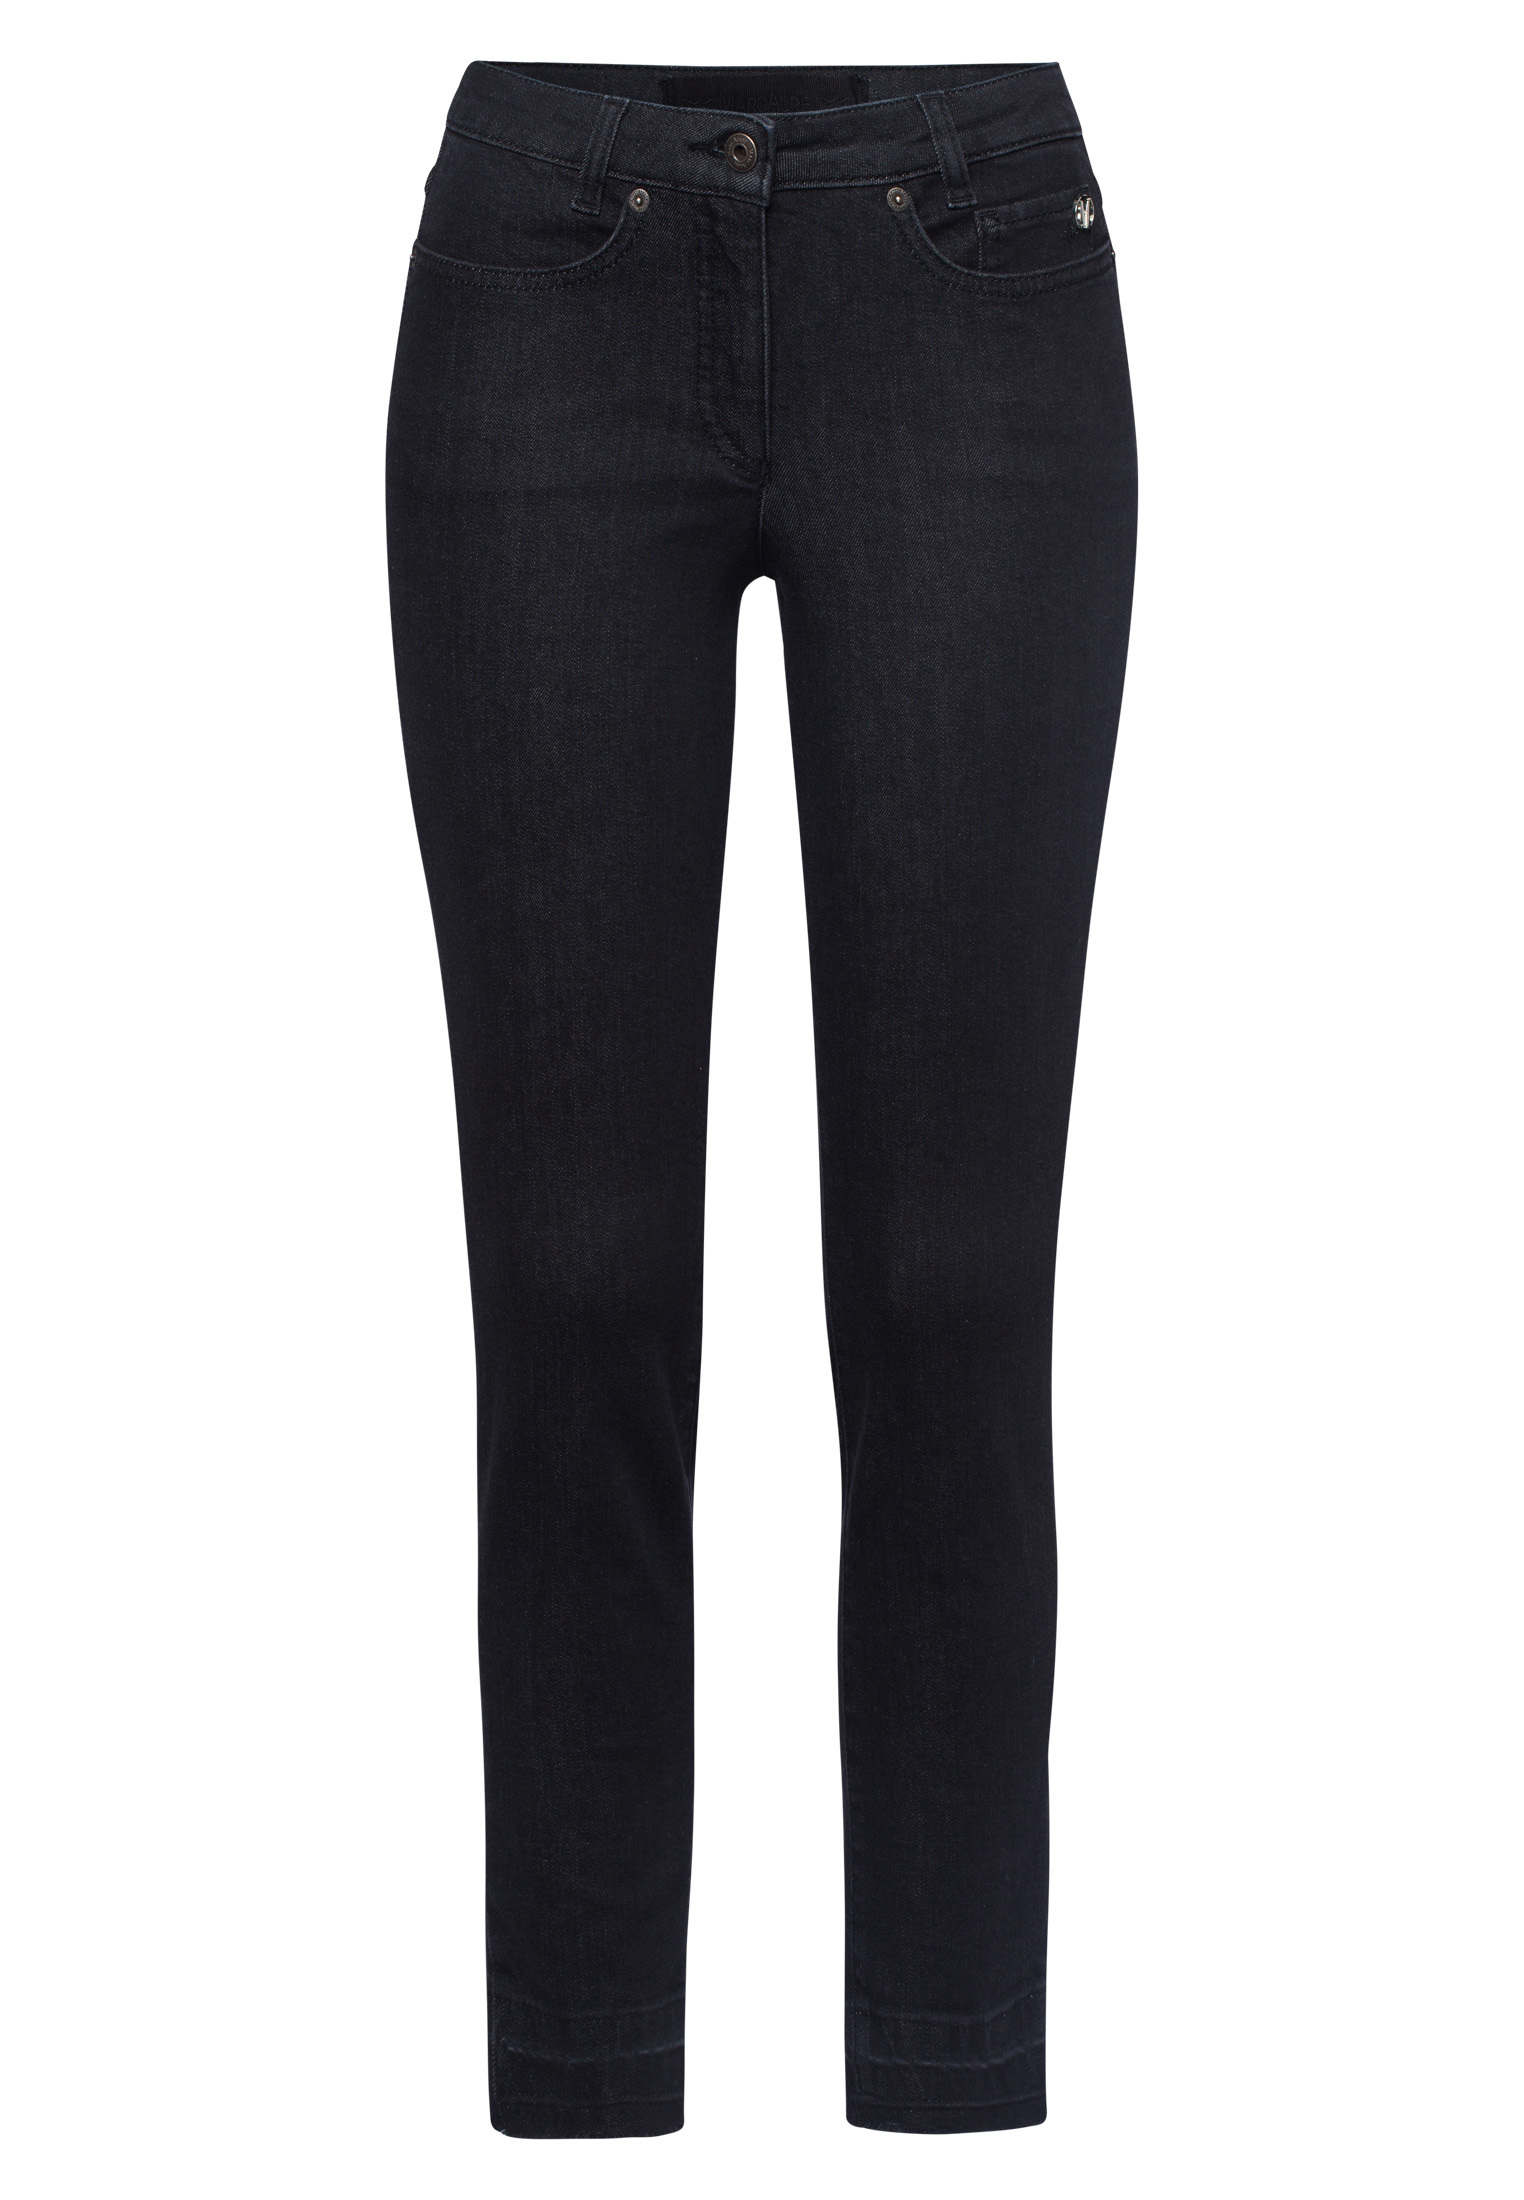 Jeans five-pocket style | Trousers & Jeans | Sale